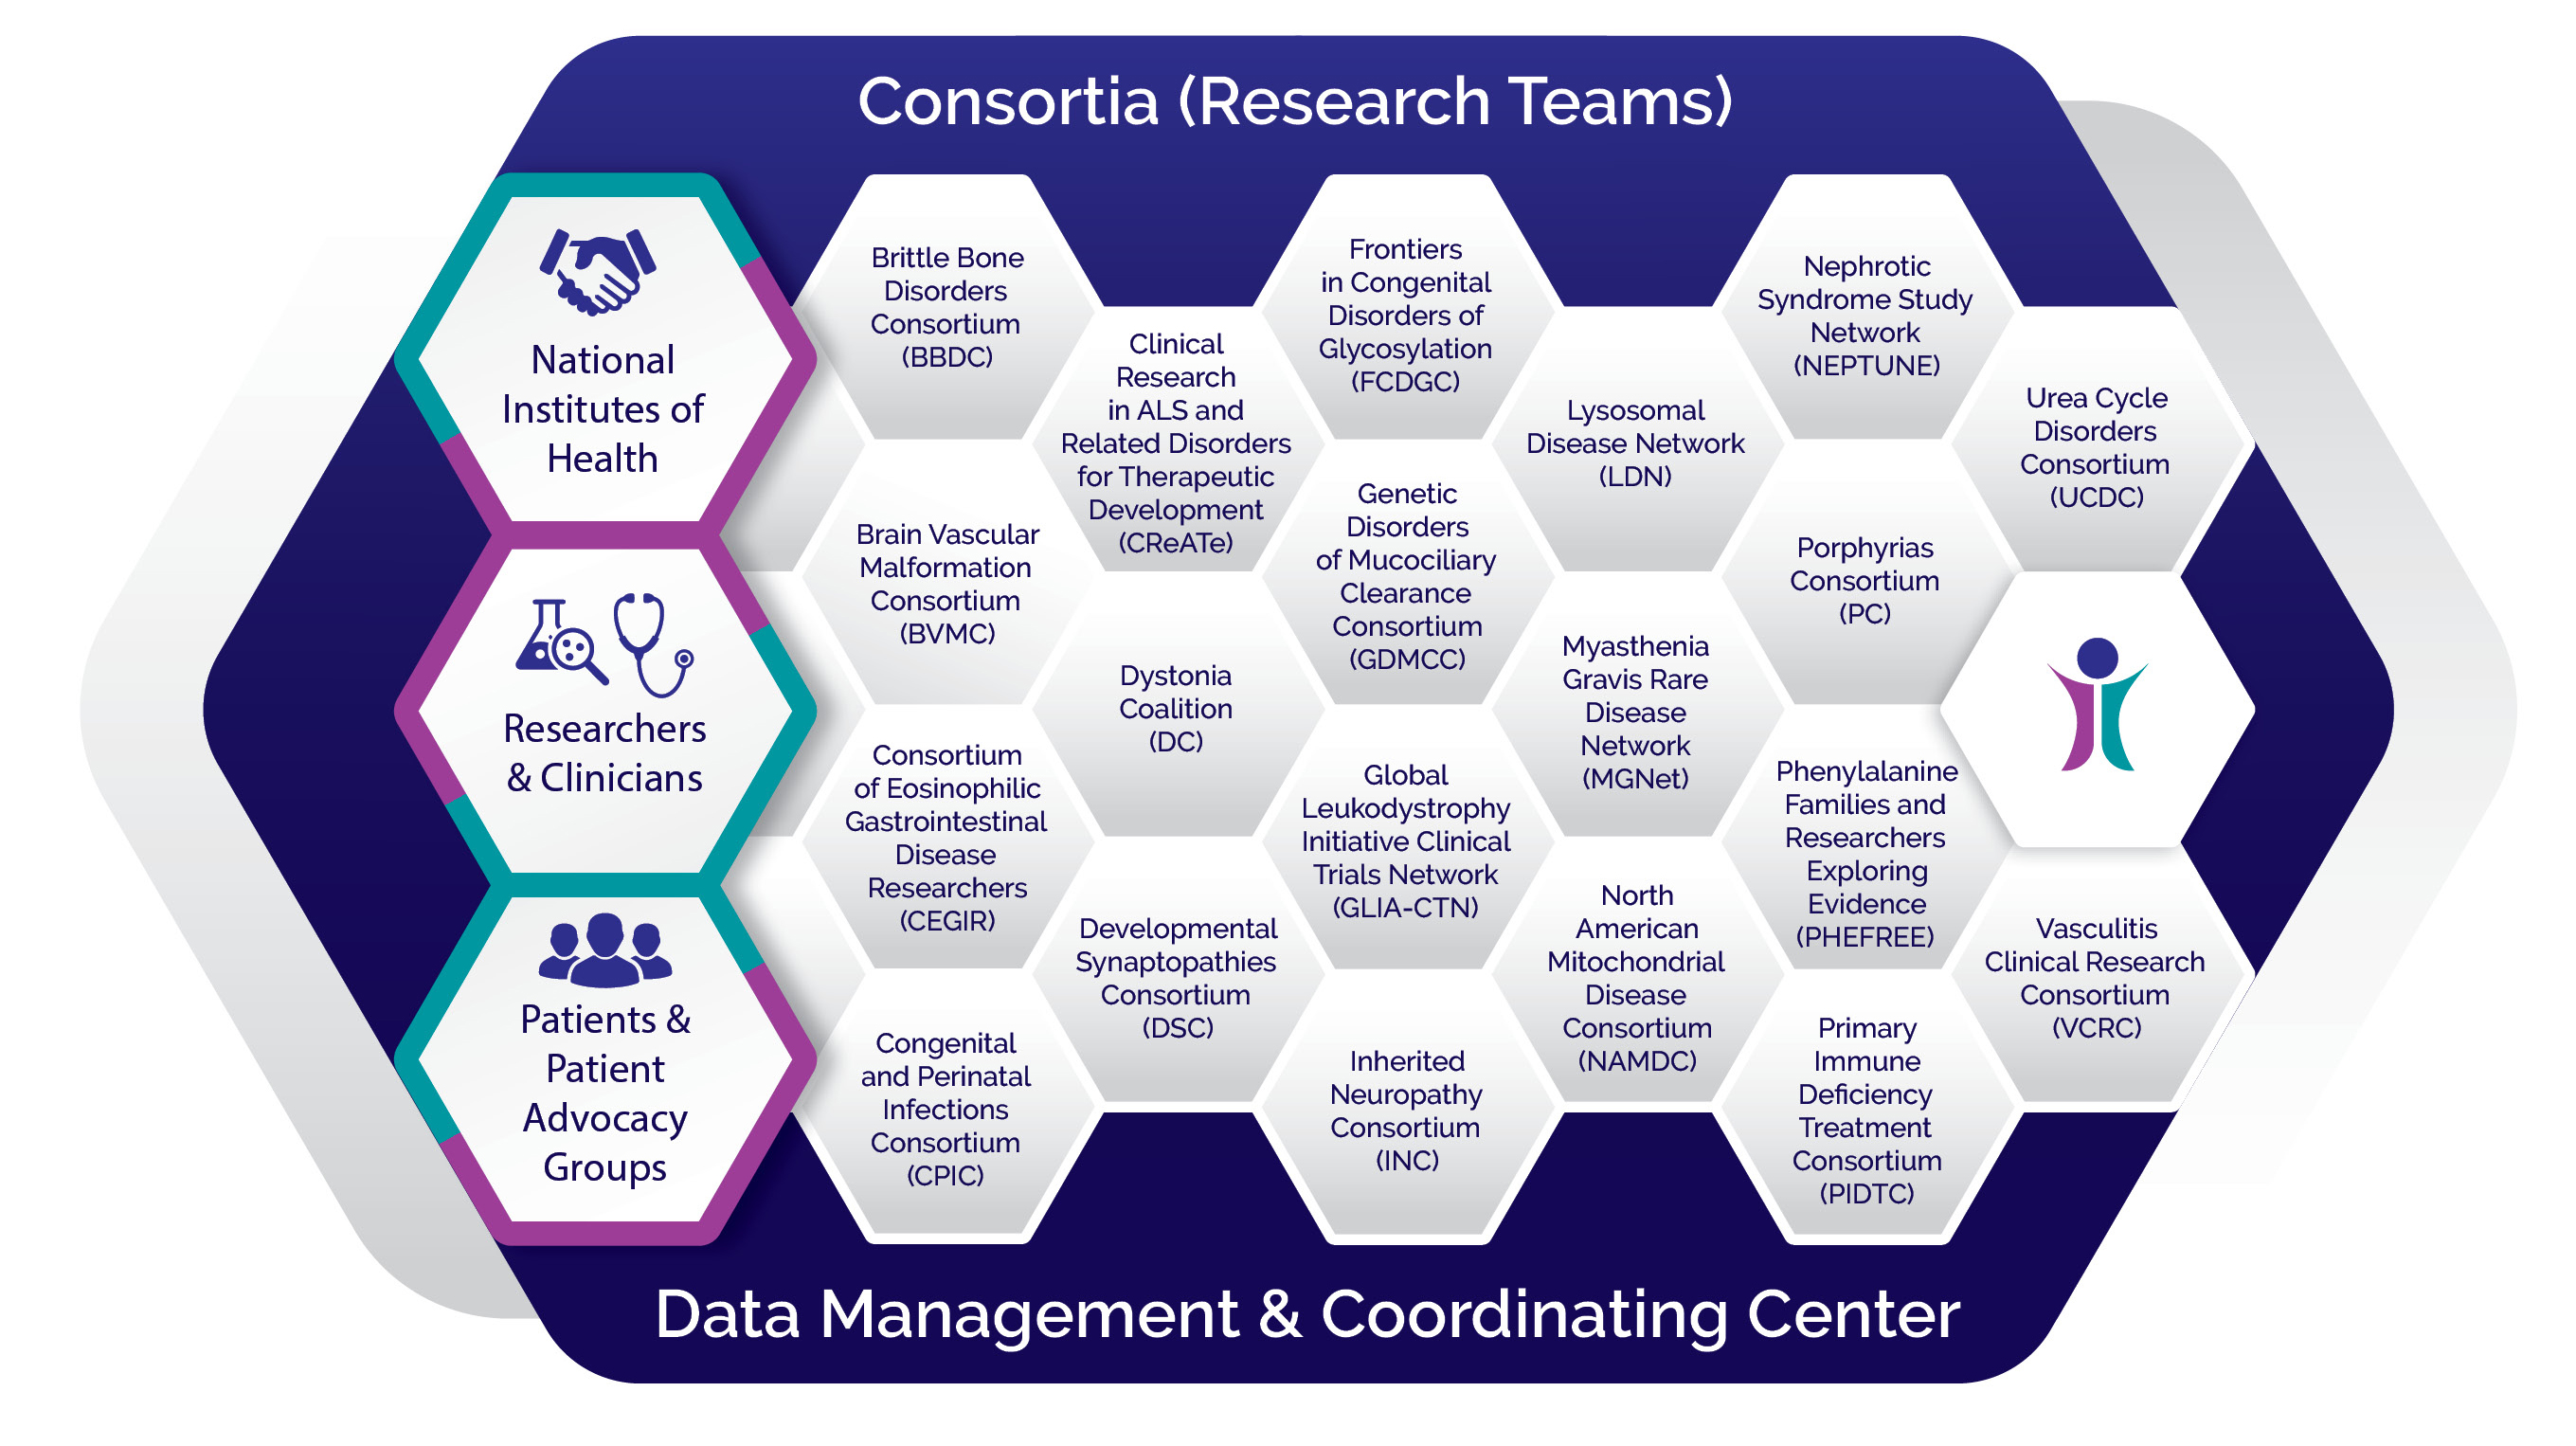 Network Infographic details the 20 RDCRN Consortia